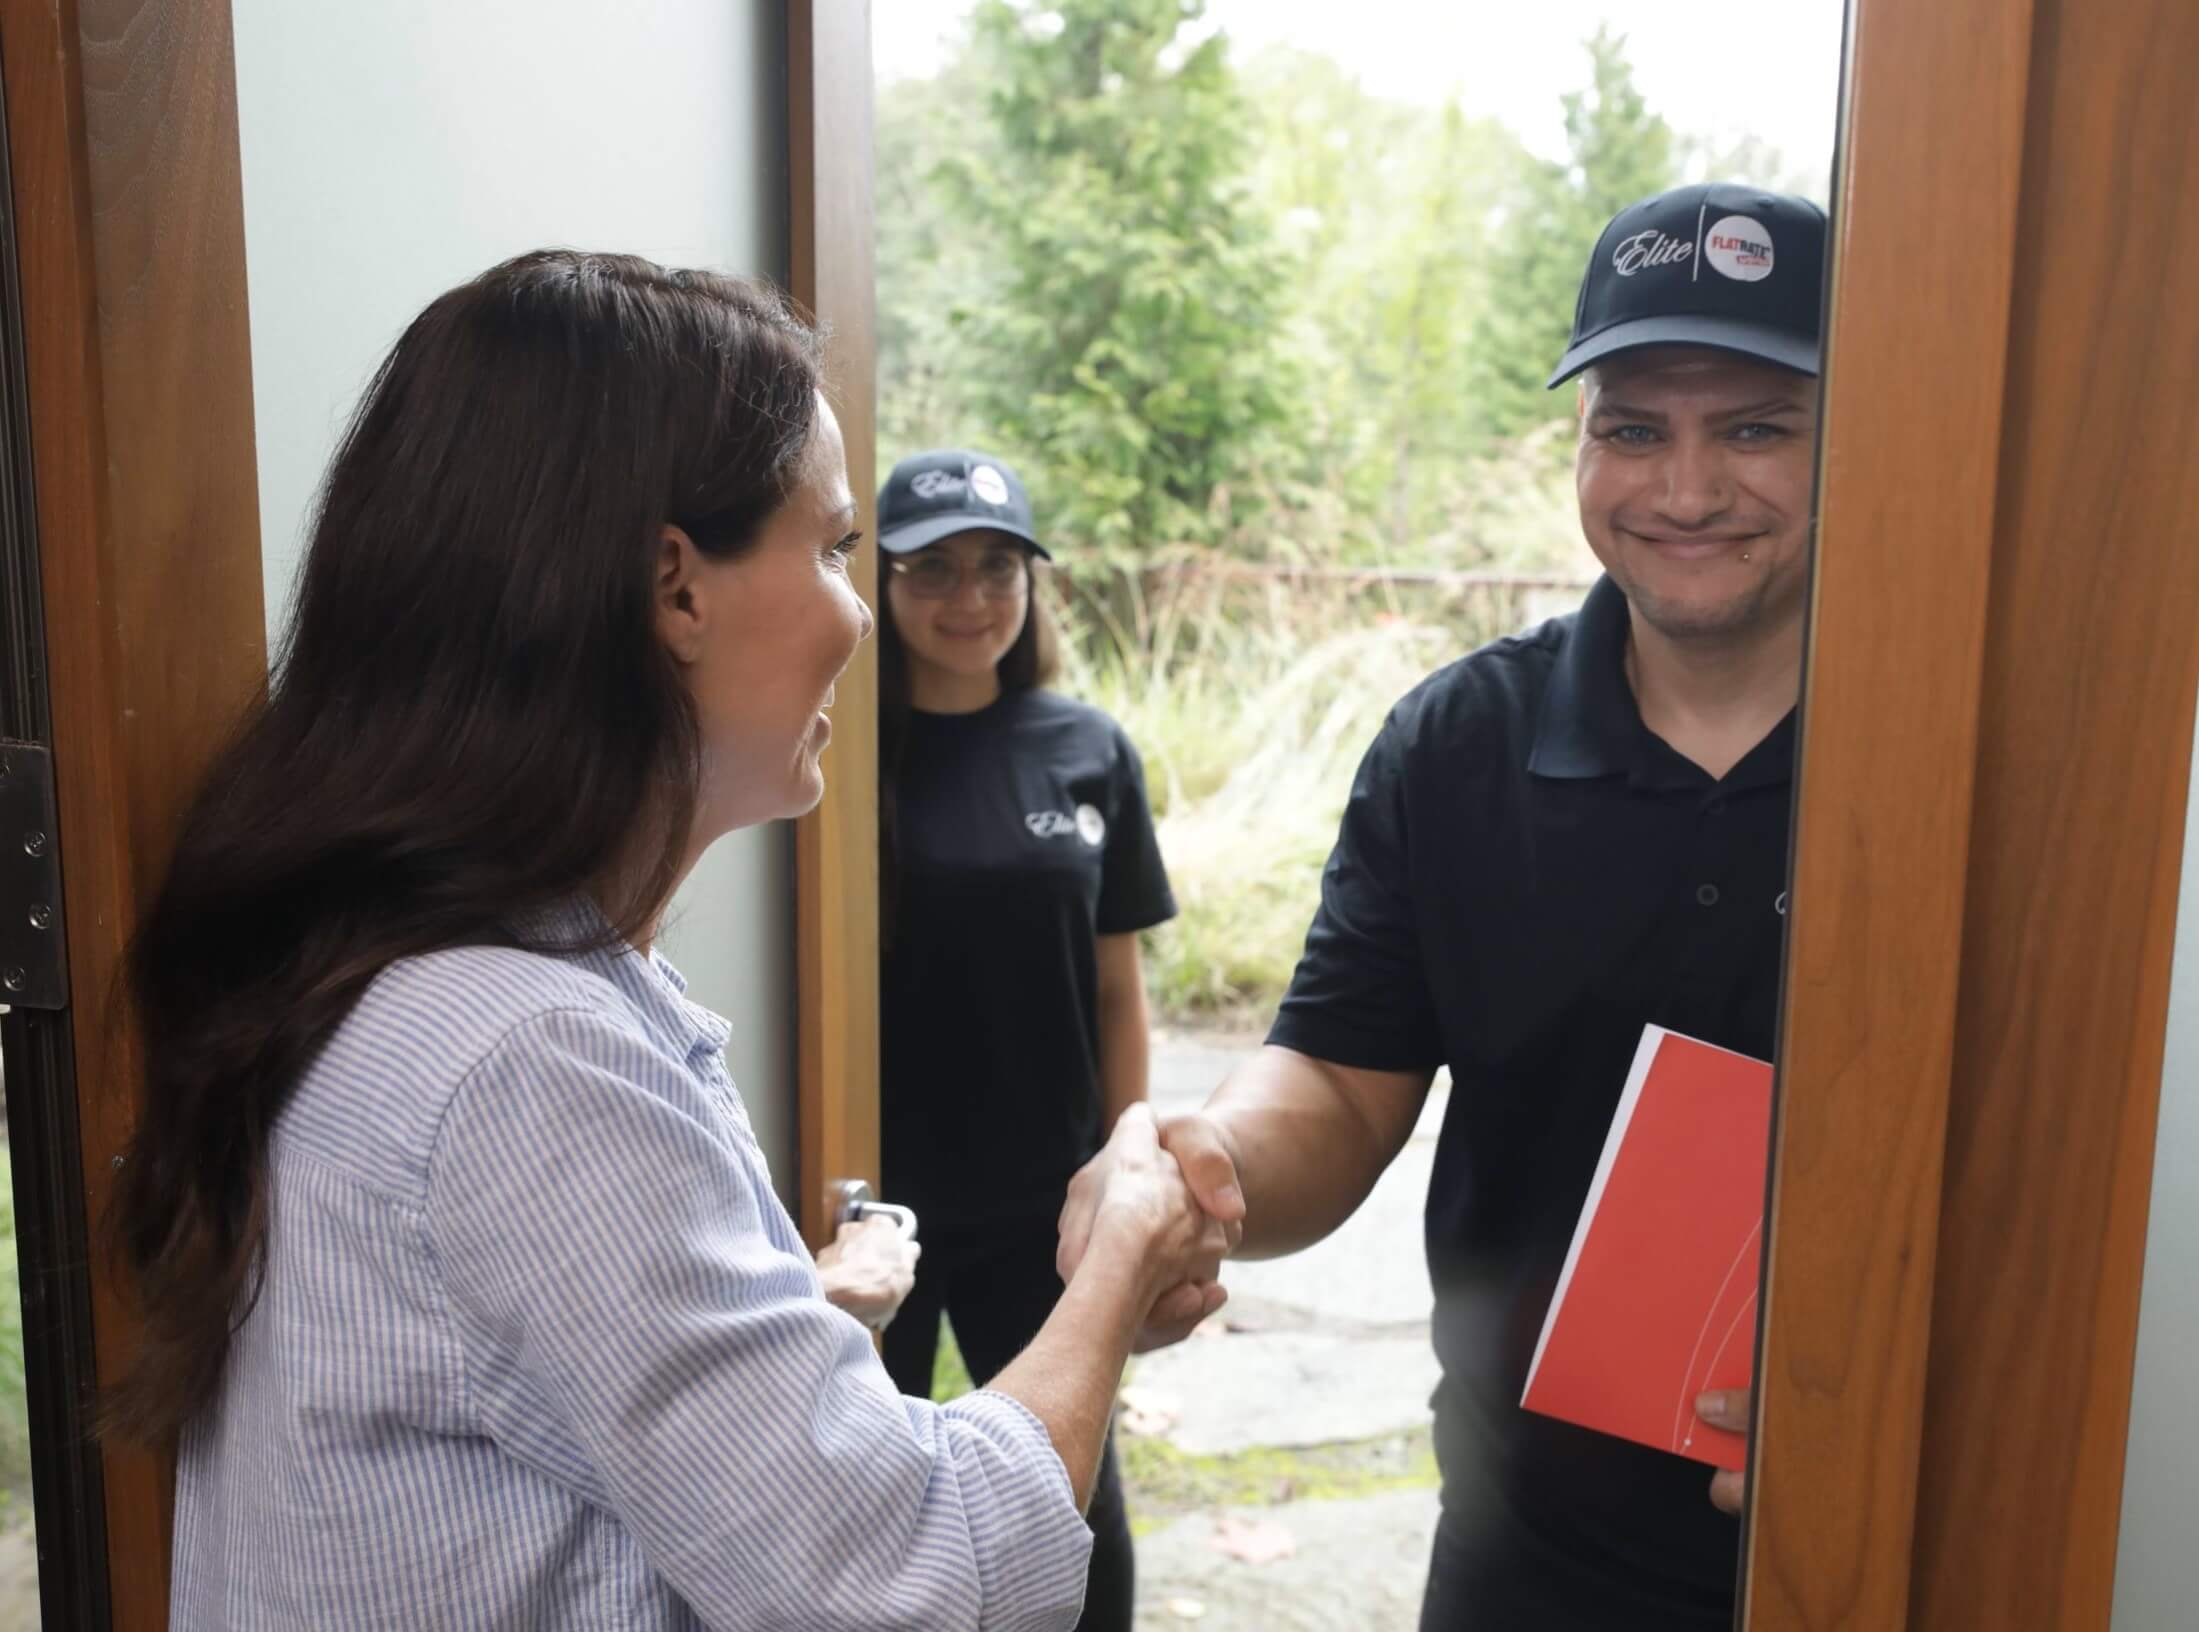 Flatrate mover shaking hands with a satisfied customer in front of her home's front door